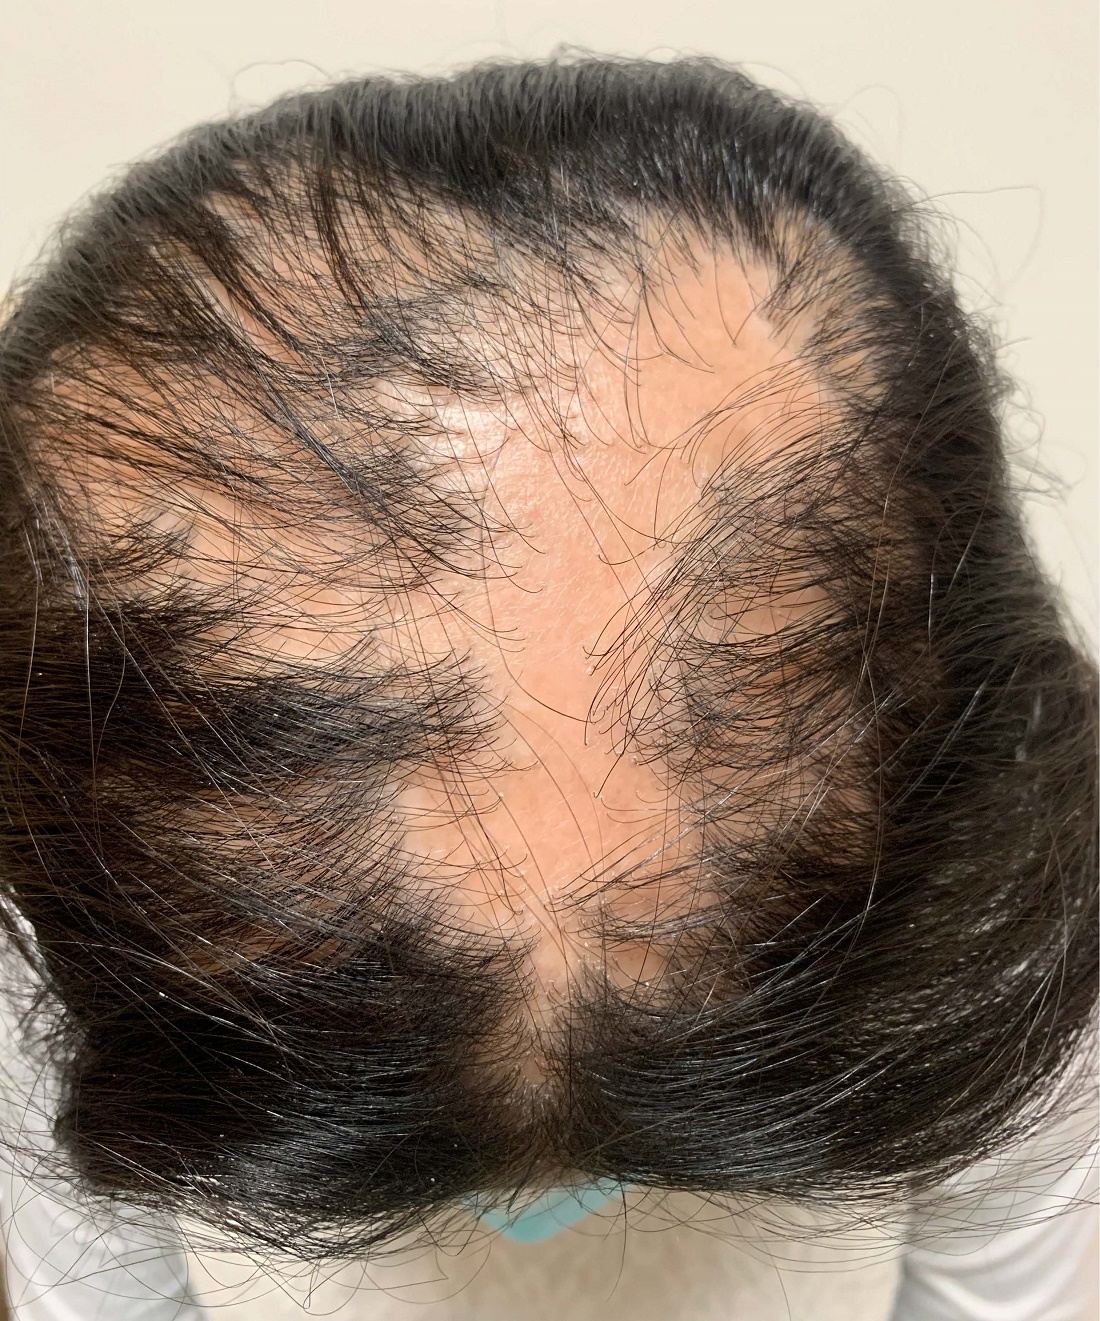 An 11-year-old female with a 3-year history of alopecia | MDedge Pediatrics